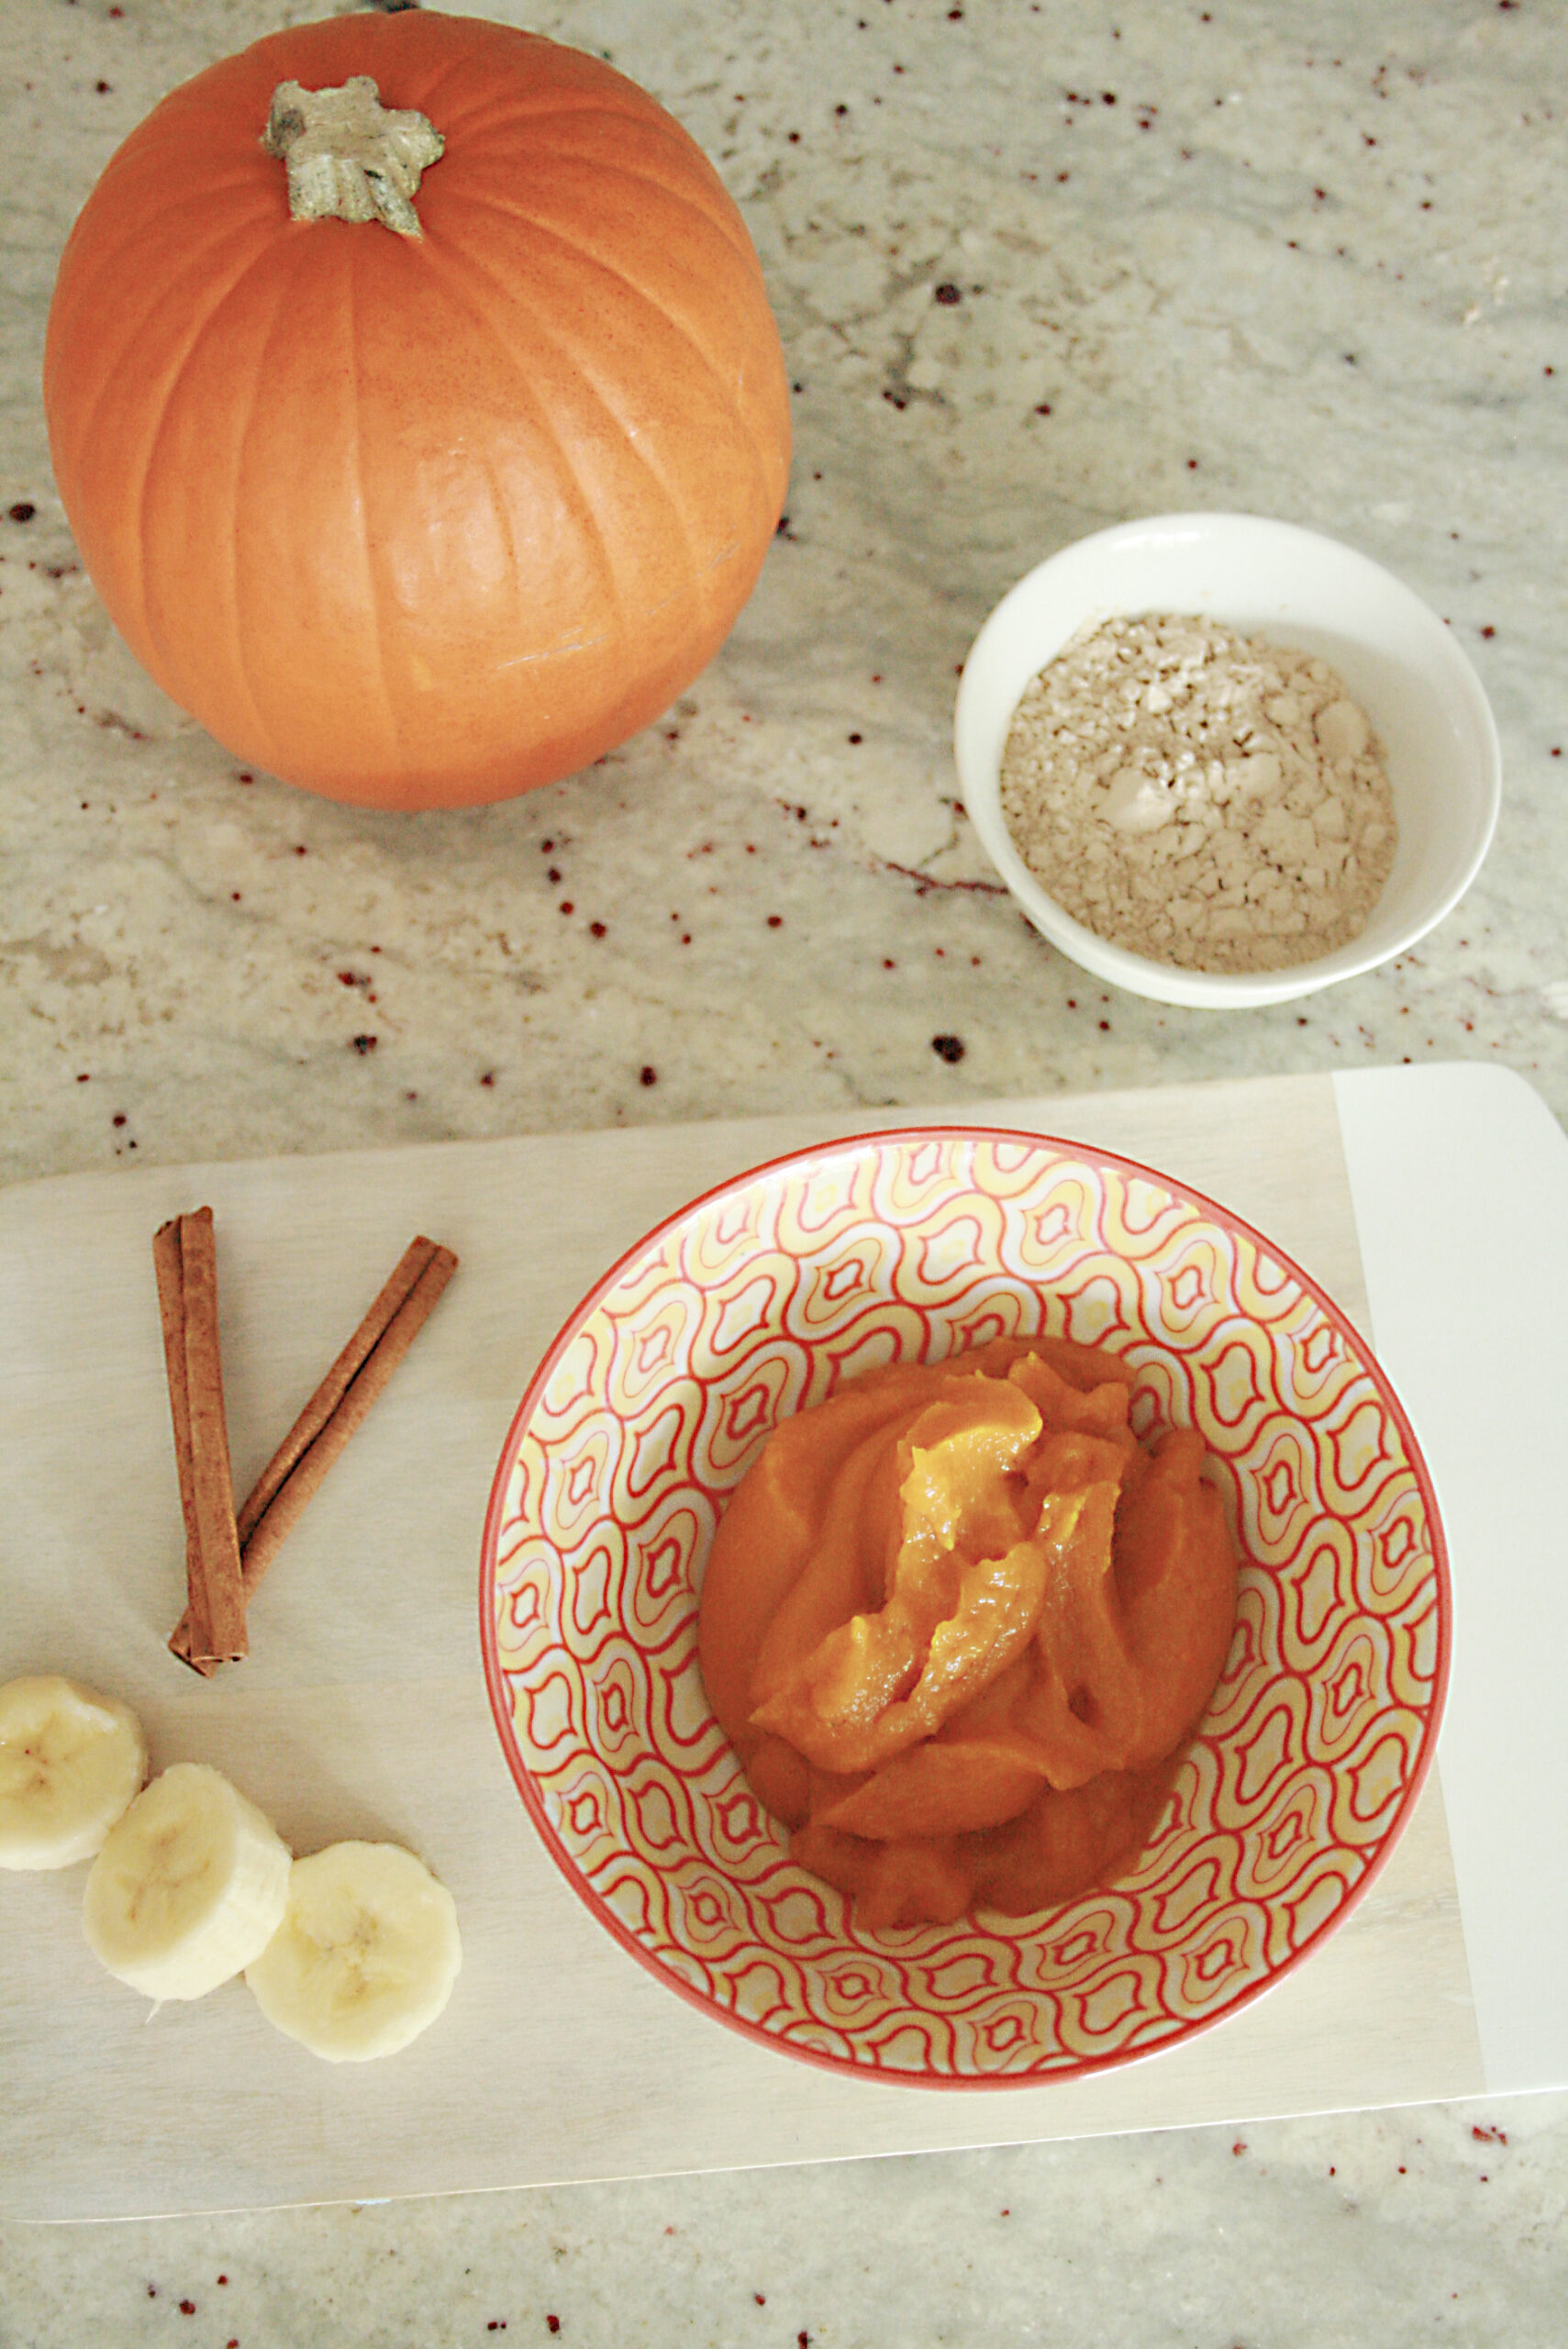 Healthy pumpkin protein shake that tastes so good that you would think you are eating pumpkin pie. Pumpkin Pie Protein Shake! || Darling Darleen Top CT Lifestyle Blogger 